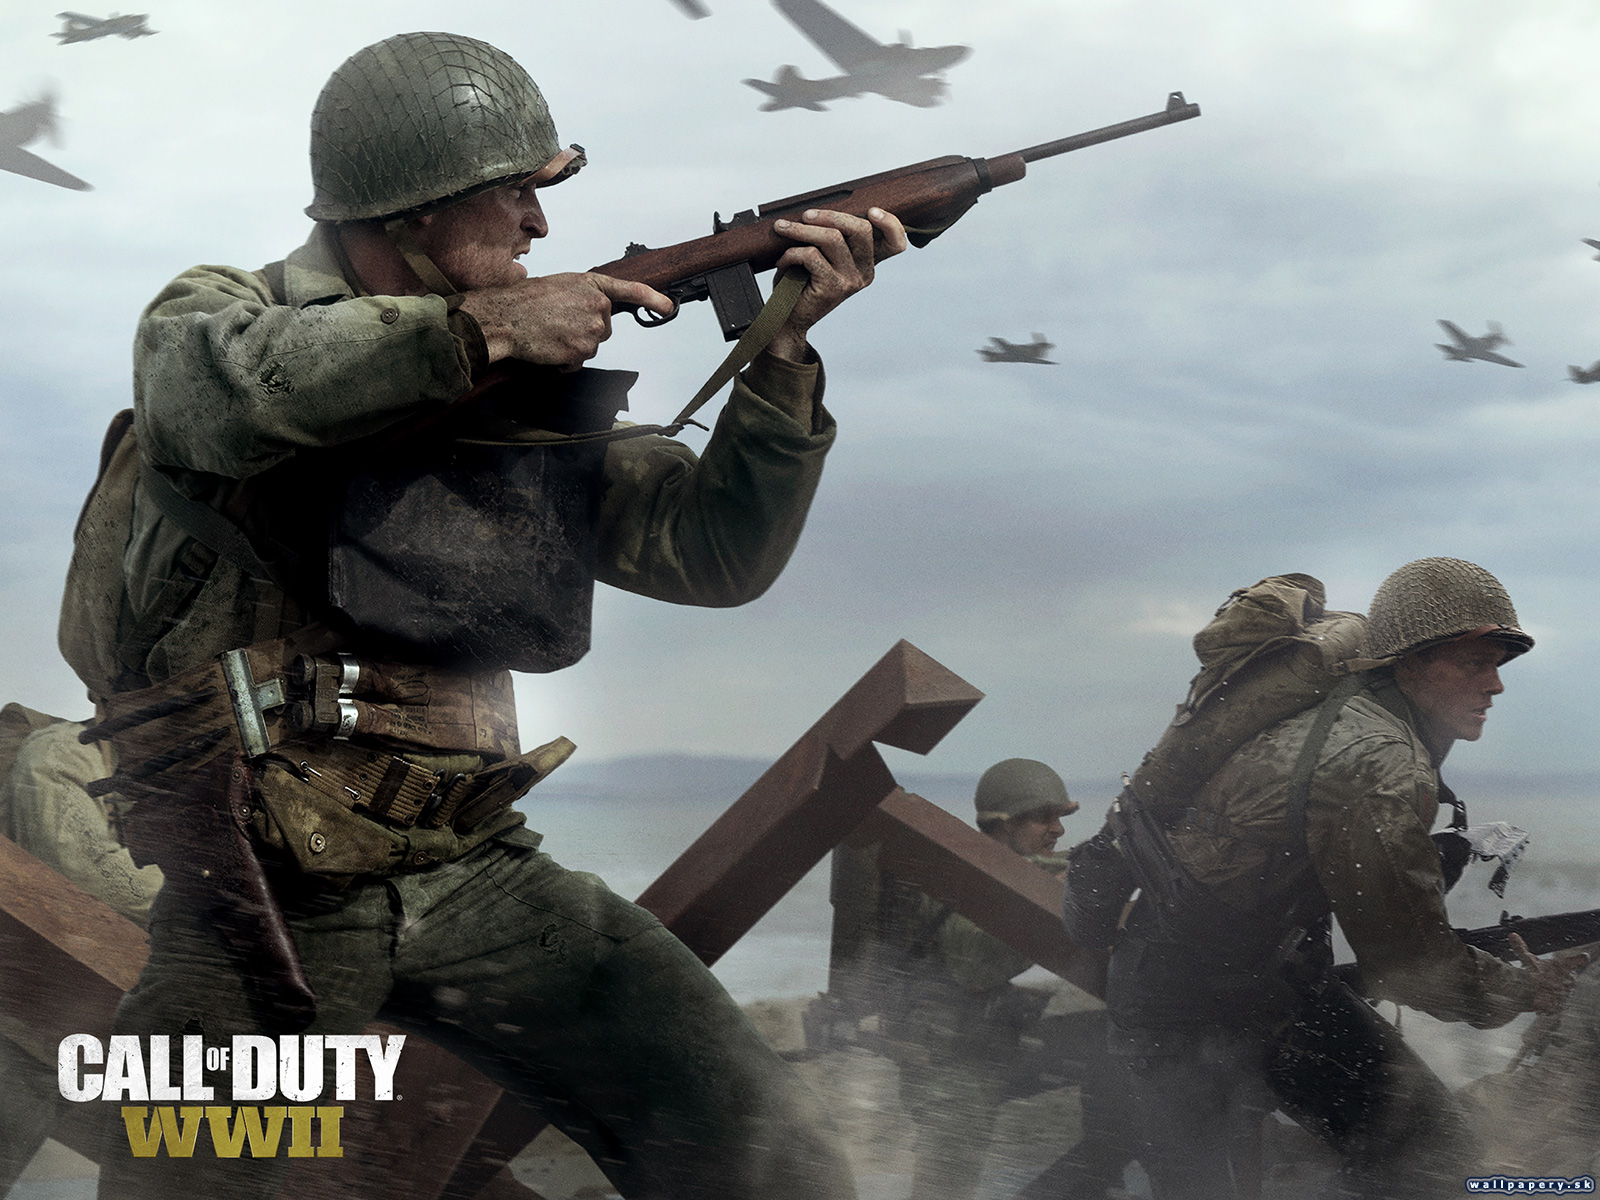 Call of Duty: WWII - wallpaper 4